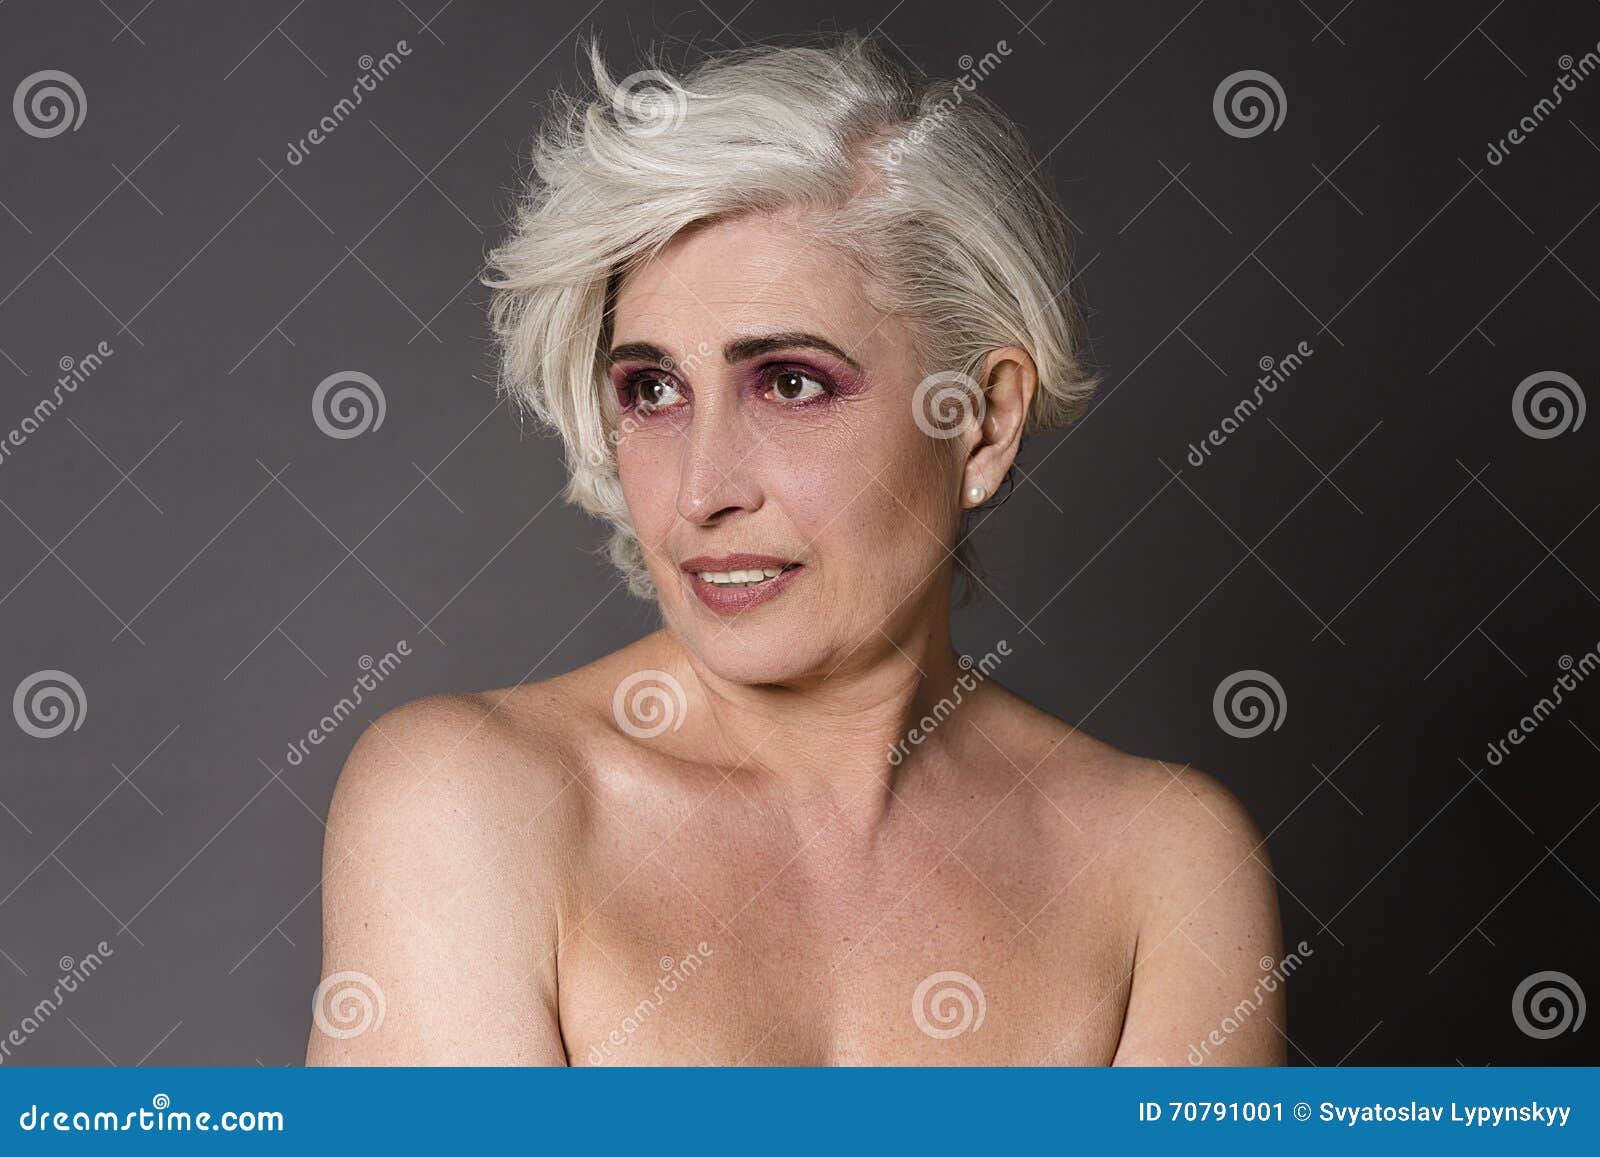 nude old amature woman